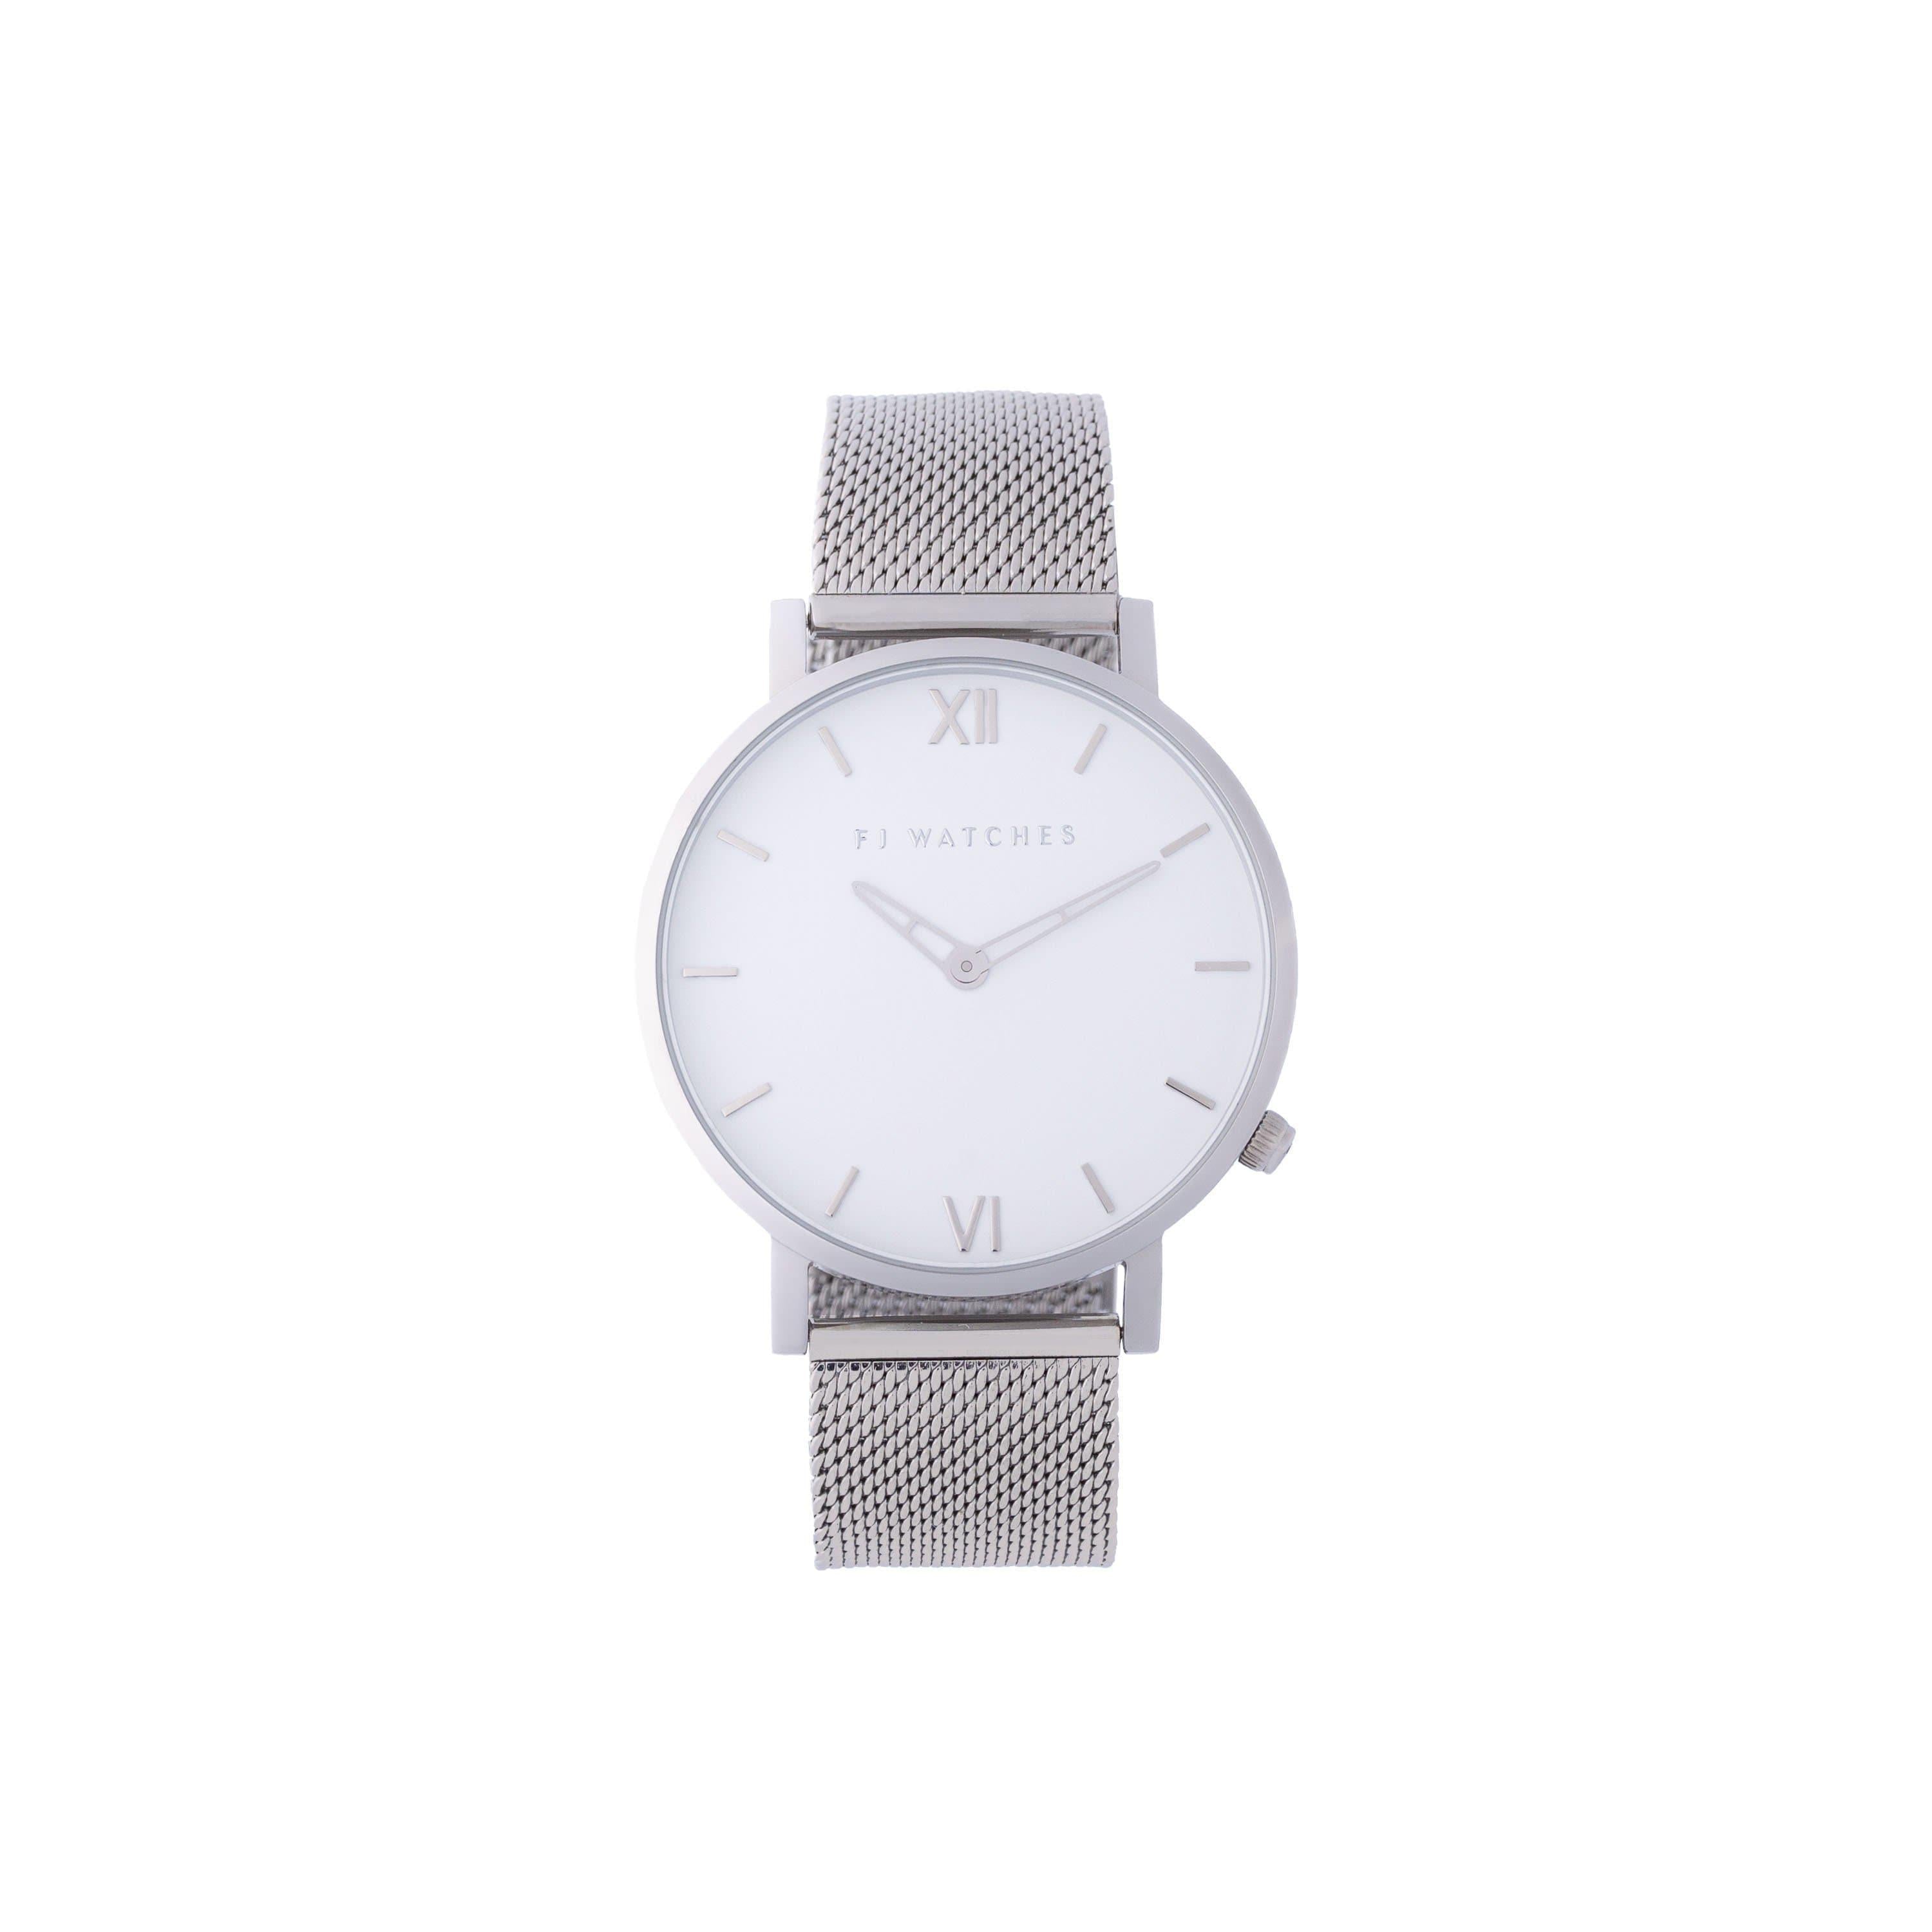 Discover Silver sun, a 36mm women's watch from Five Jwlry with a white and silver dial. This one can be paired with a silver or black mesh bracelet!